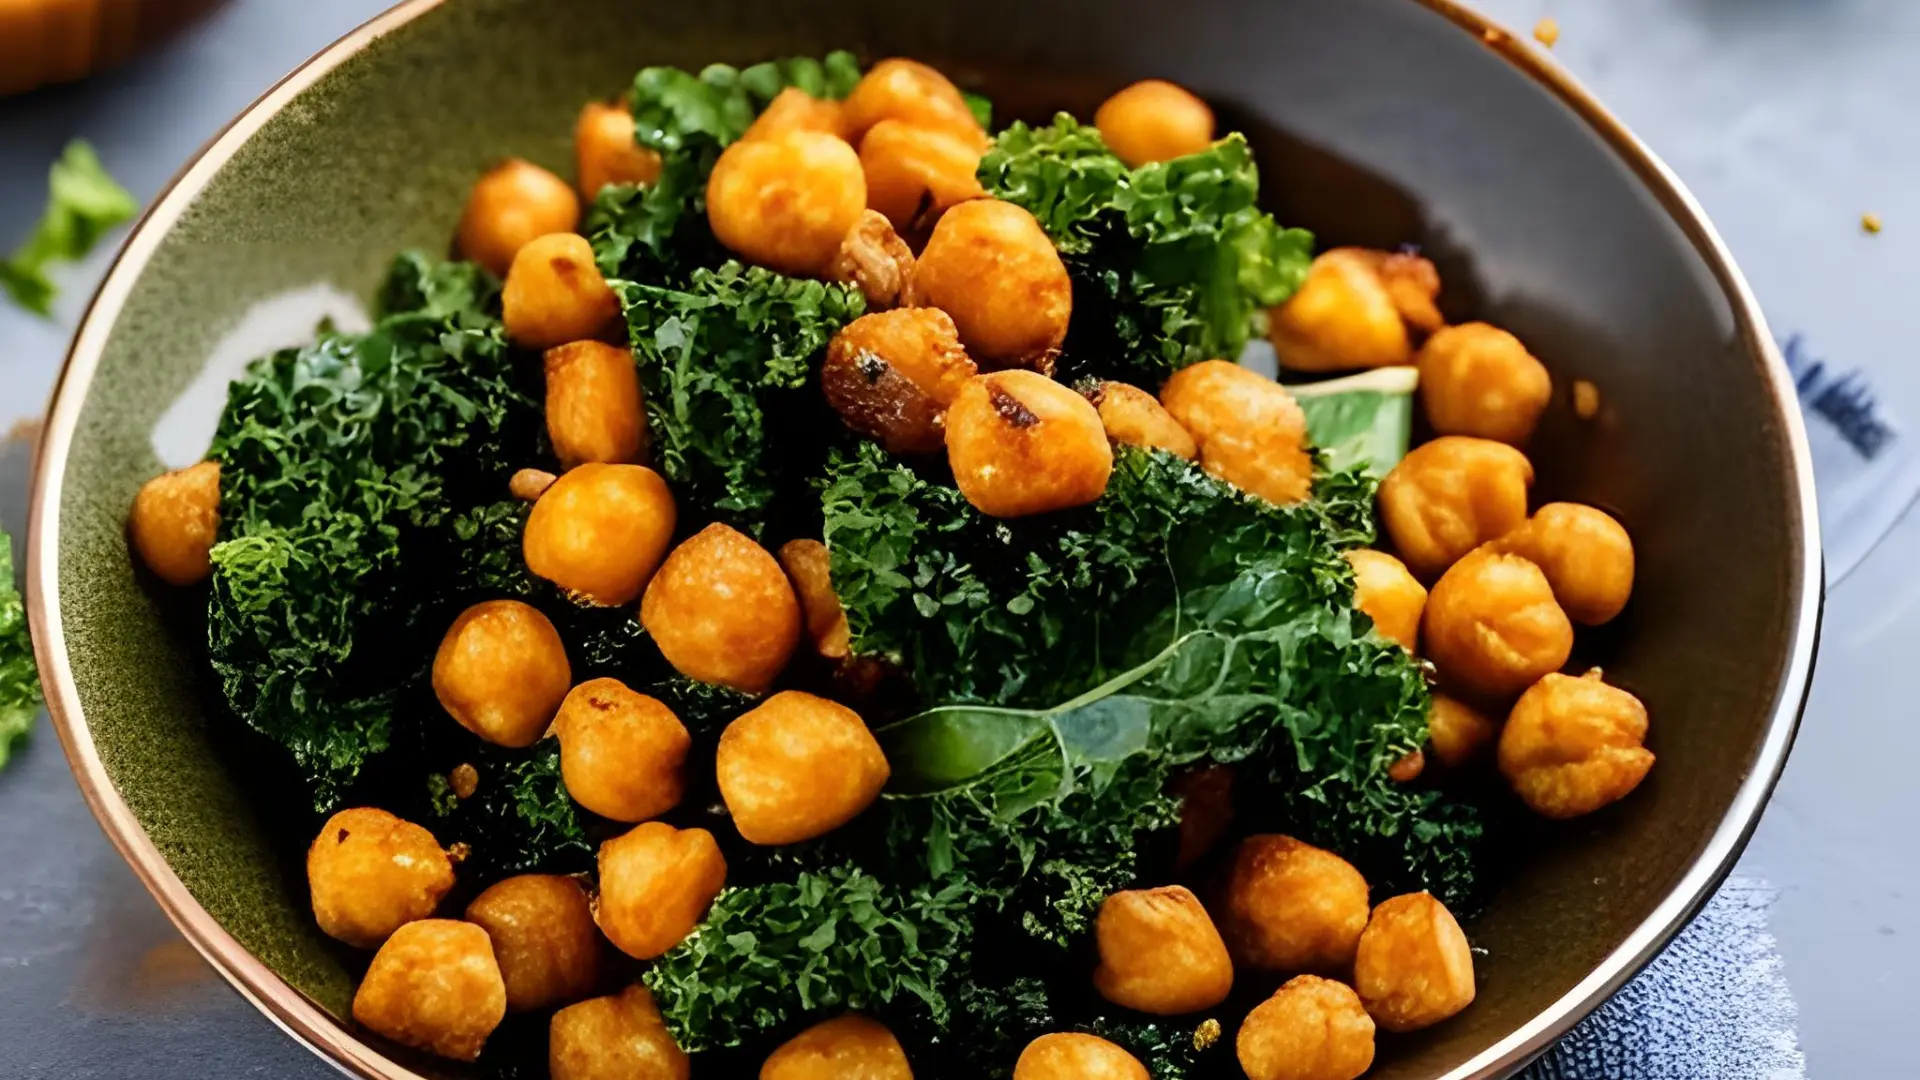 Kale chips or roasted chickpeas